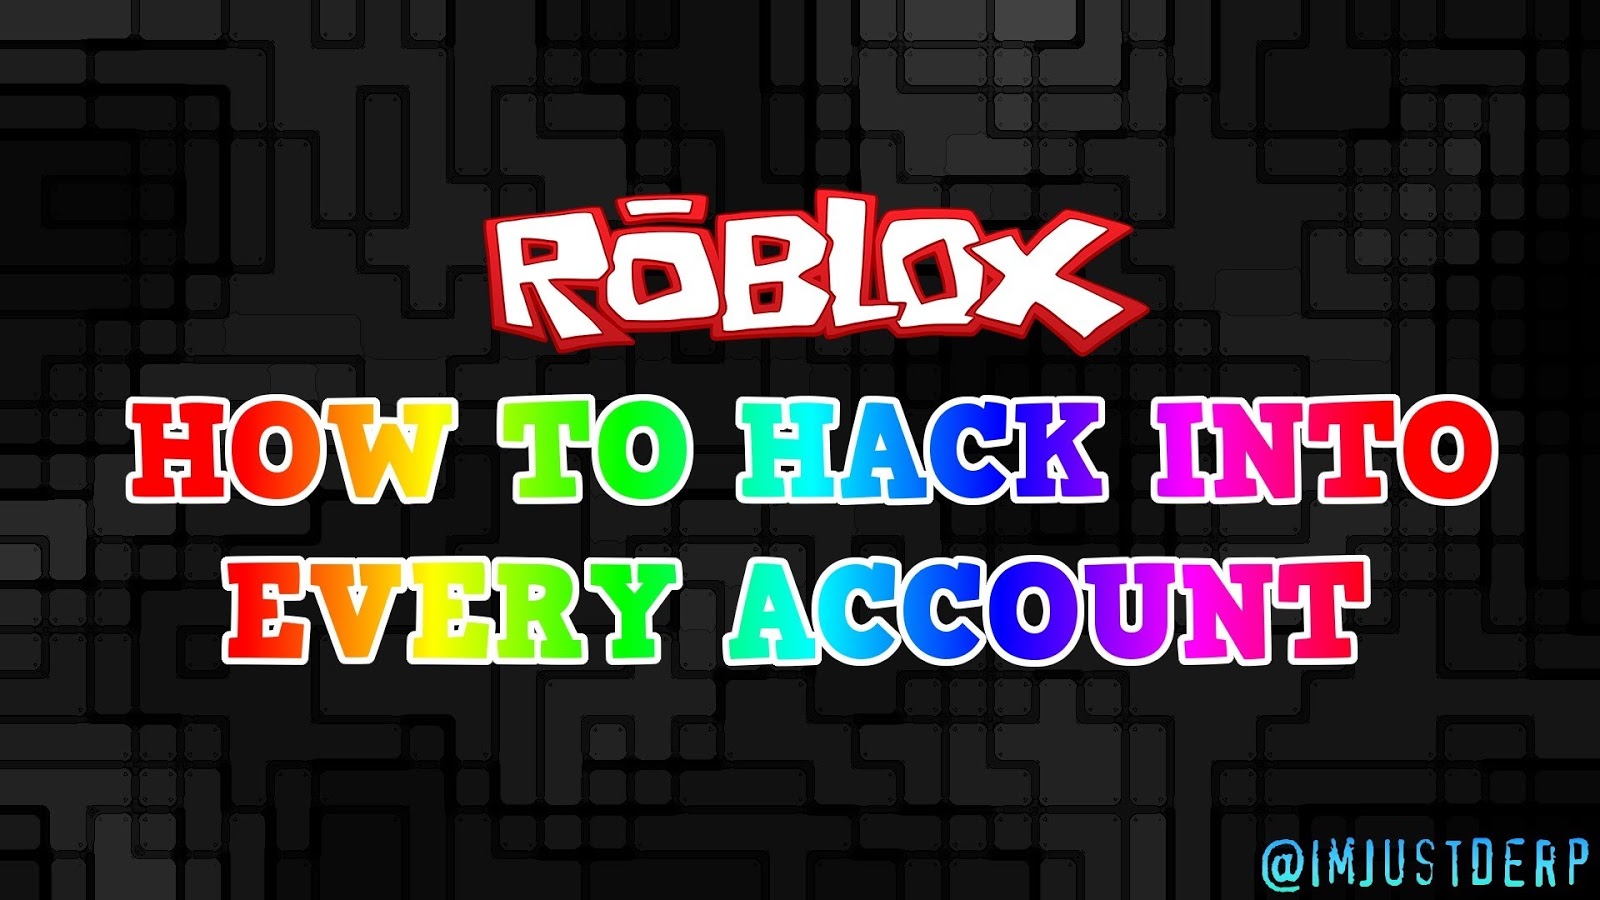 itos.fun/robux roblox hack account 2019 | uplace.today/roblox Roblox ... - 